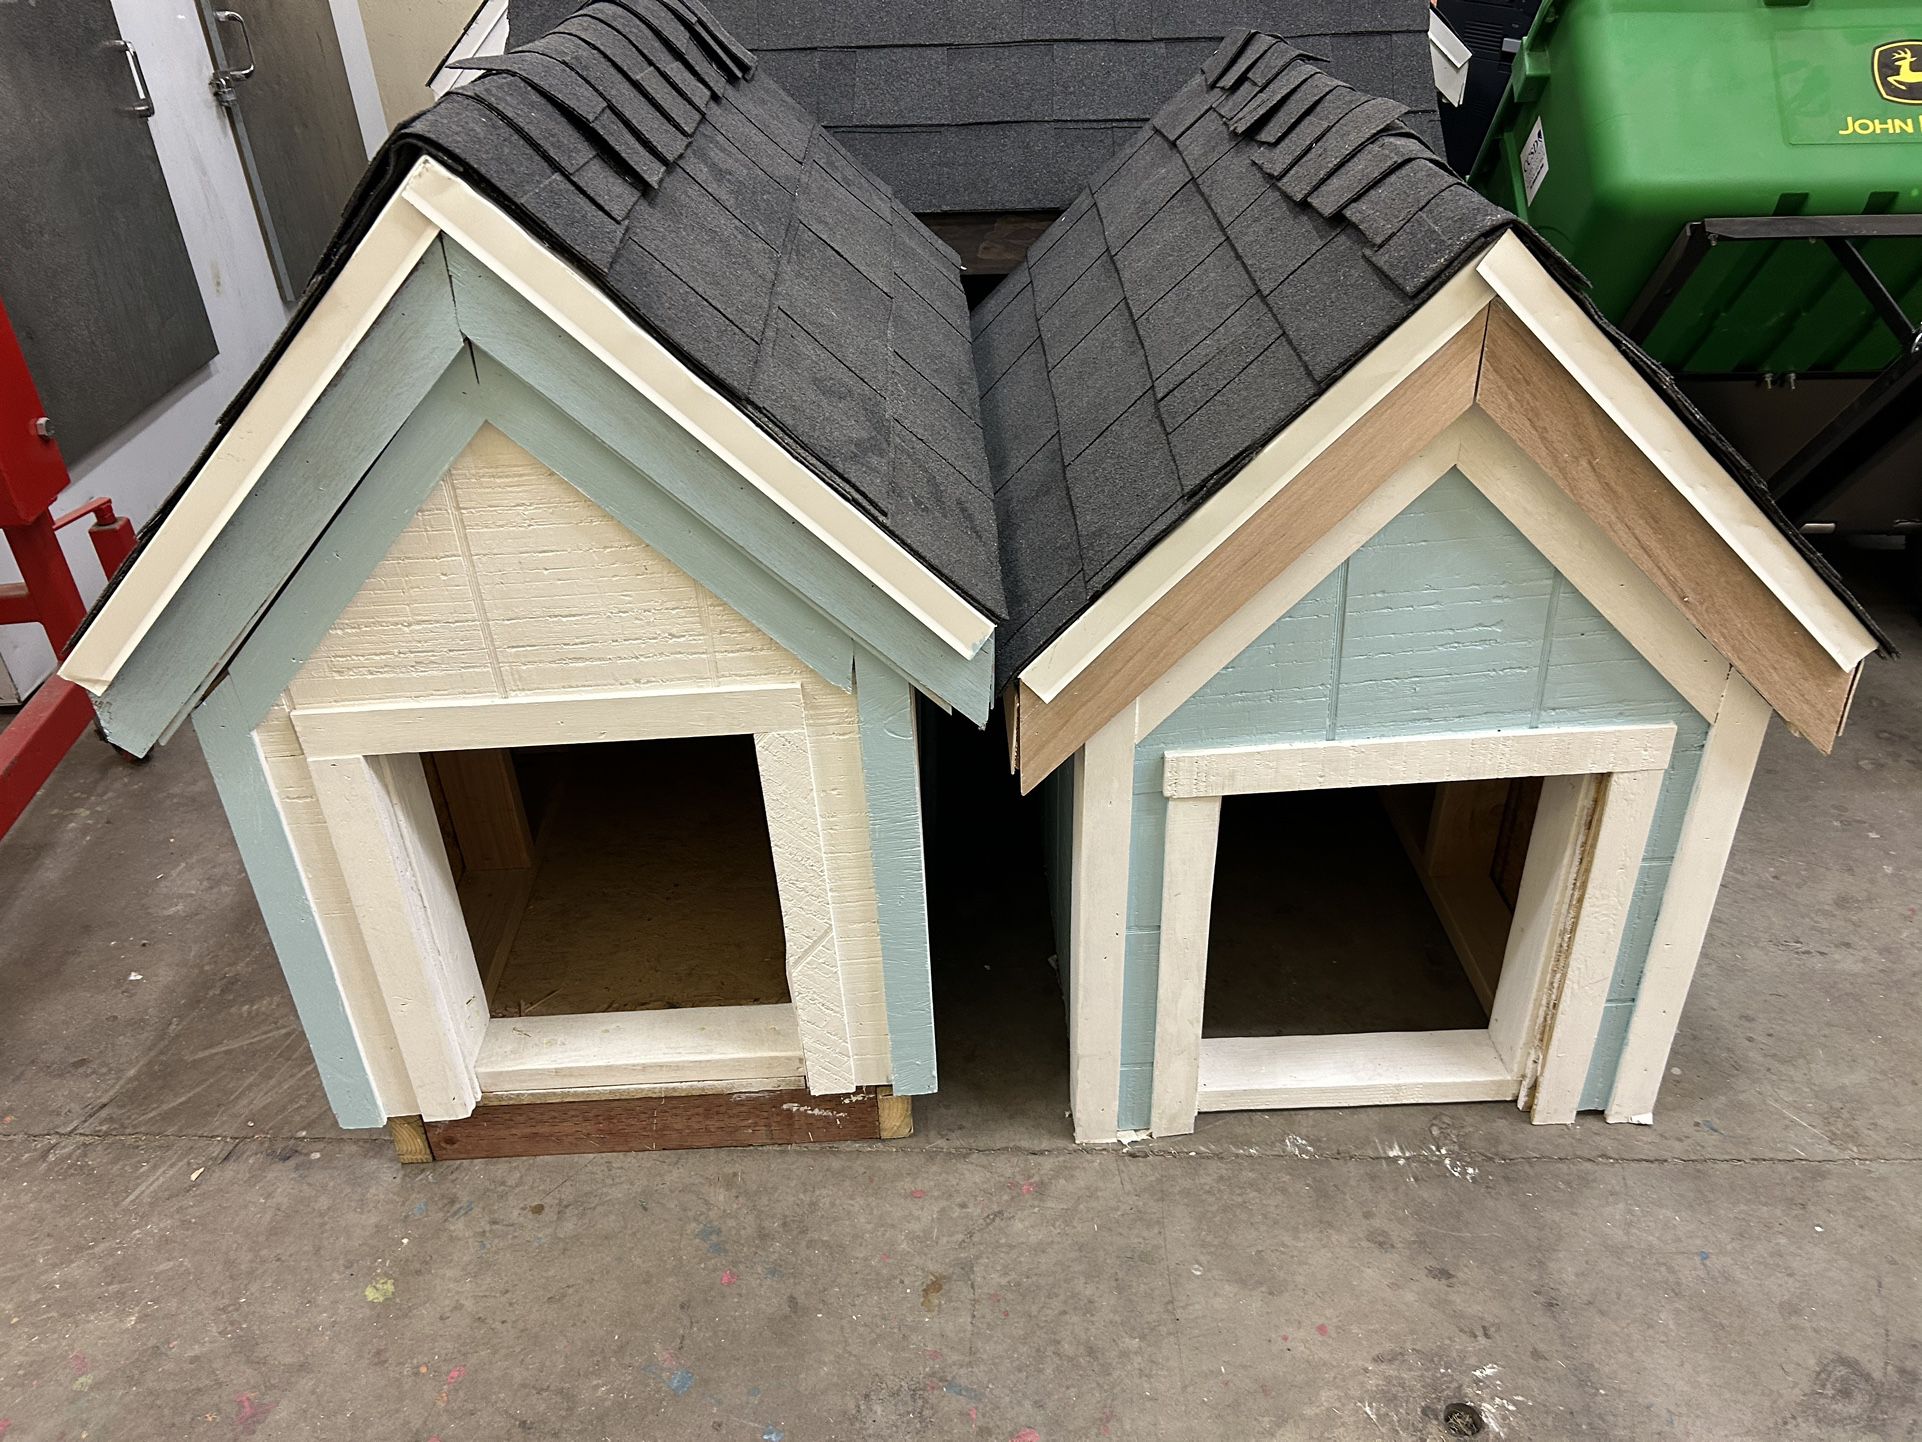 Dog houses Mad By Local High School Class